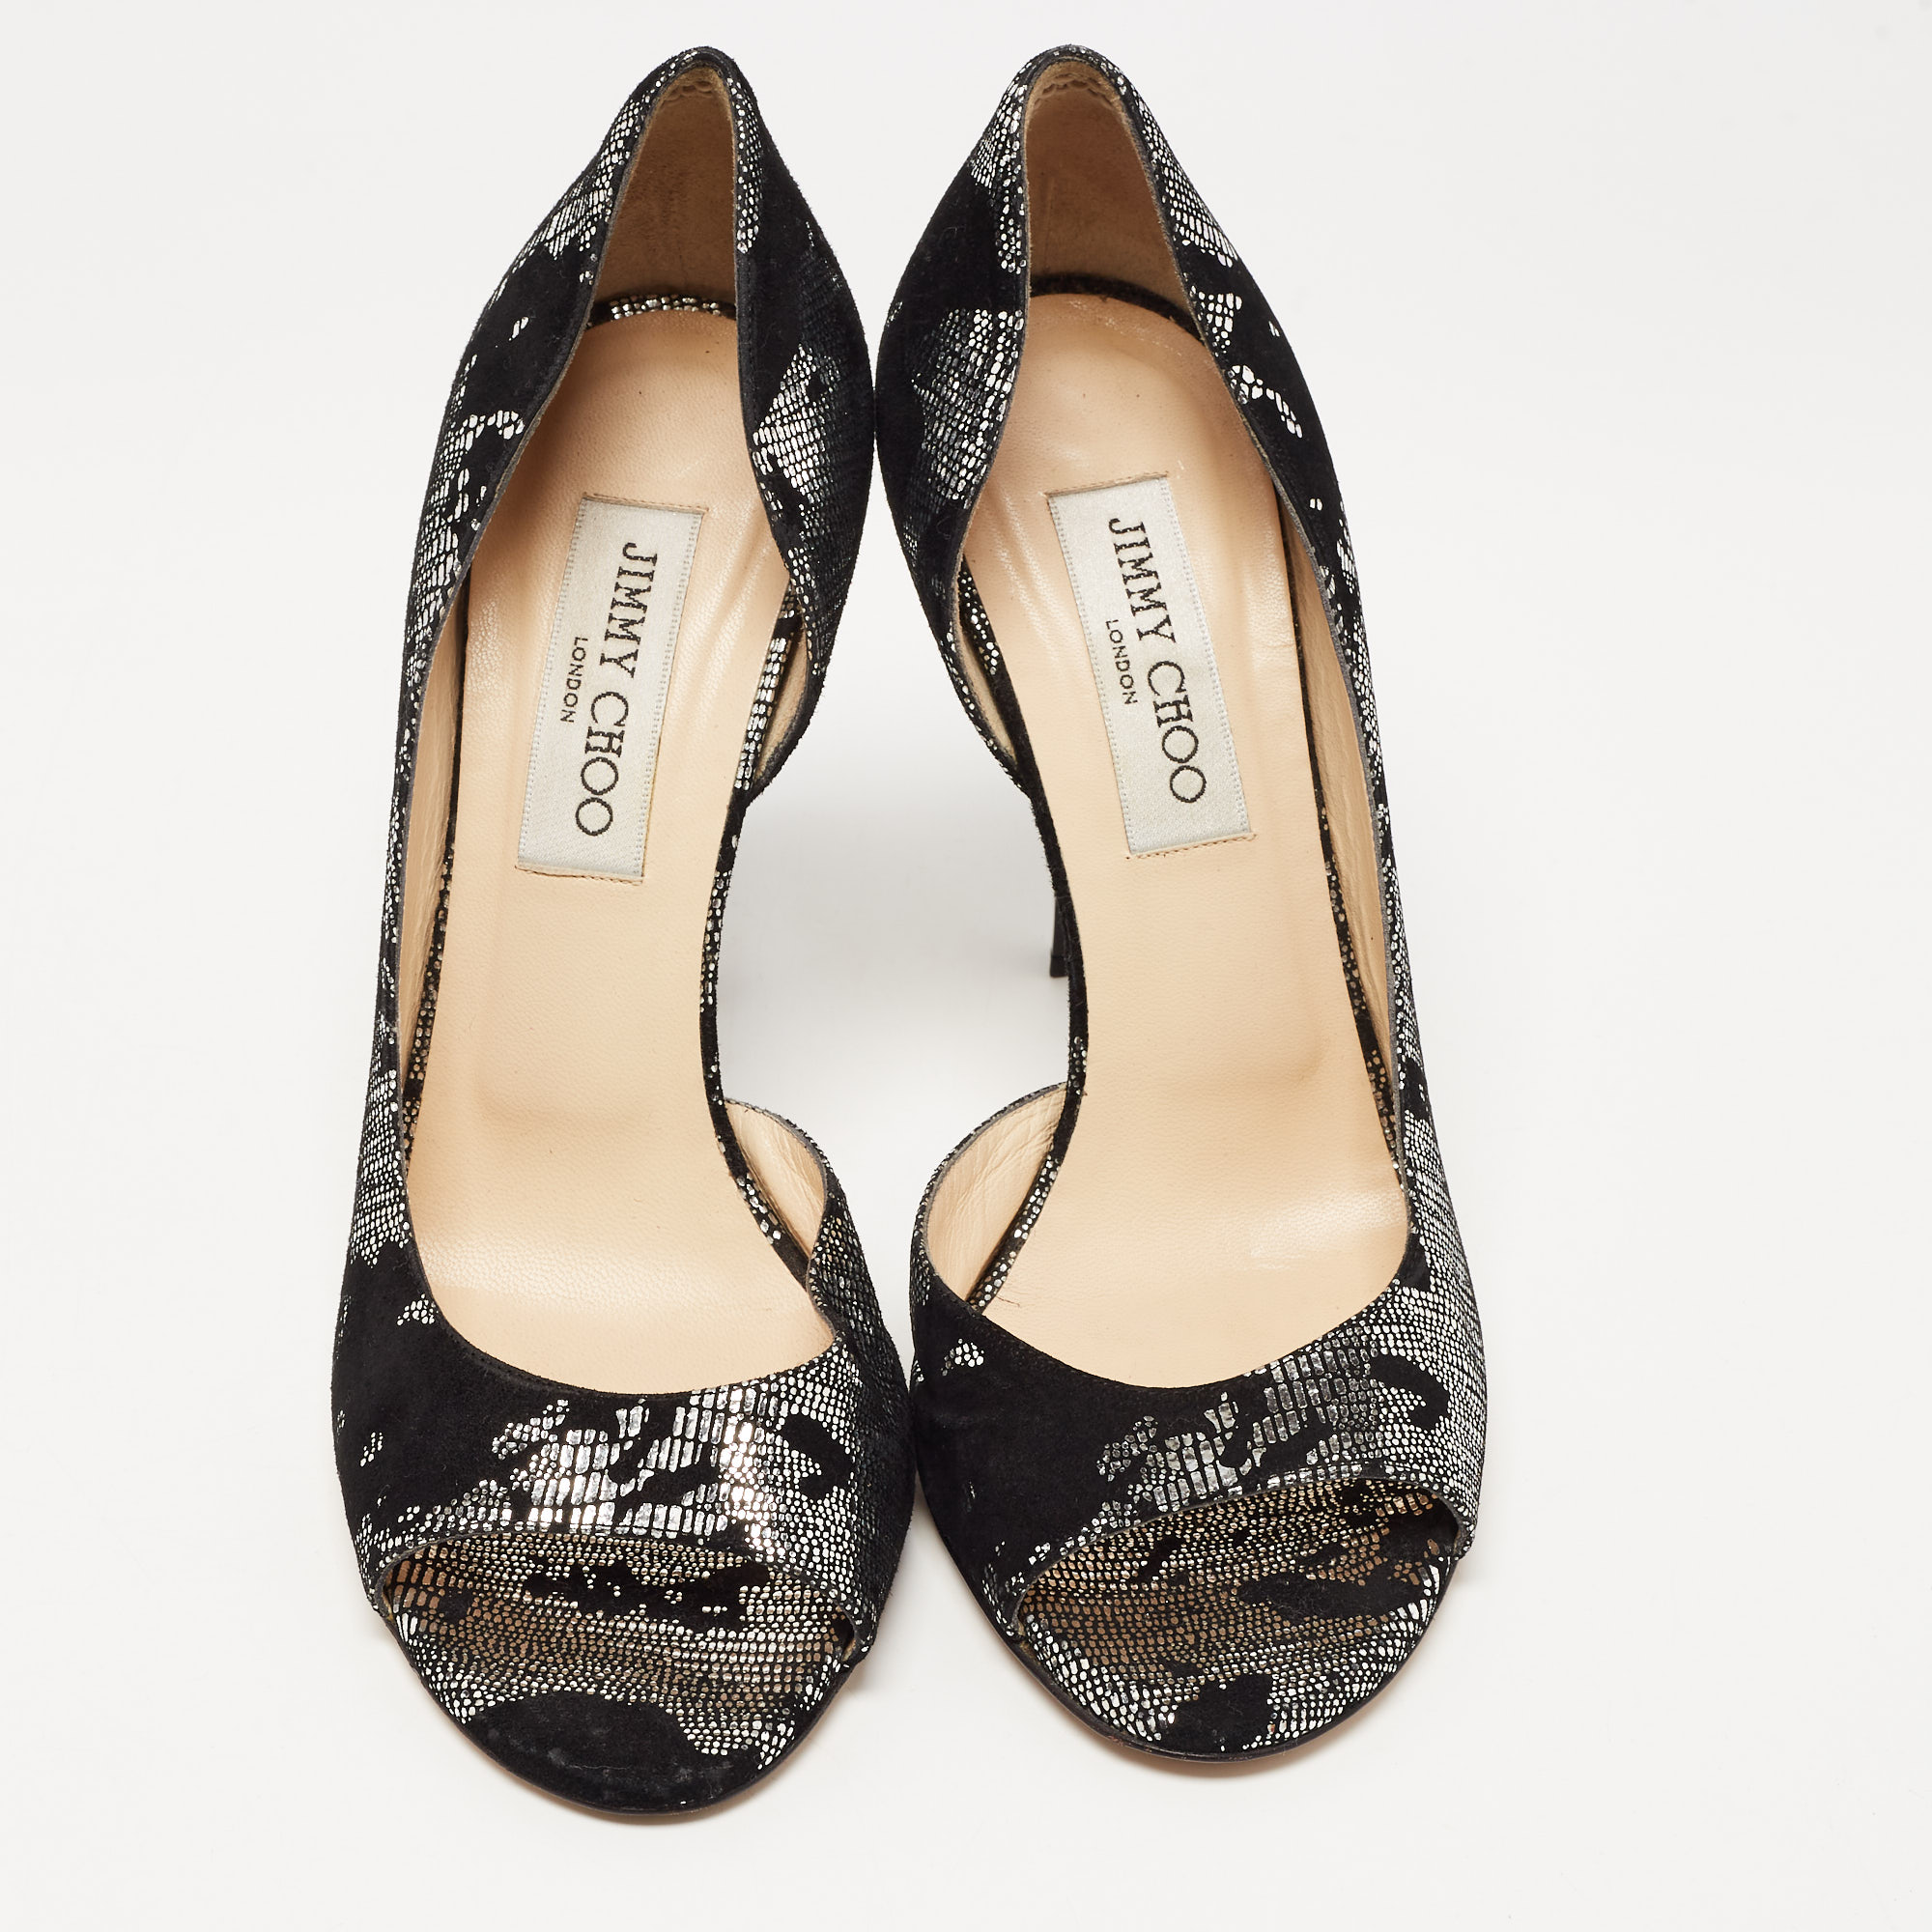 Jimmy Choo Black/Silver Suede And Fabric Open Toe Pumps 38.5